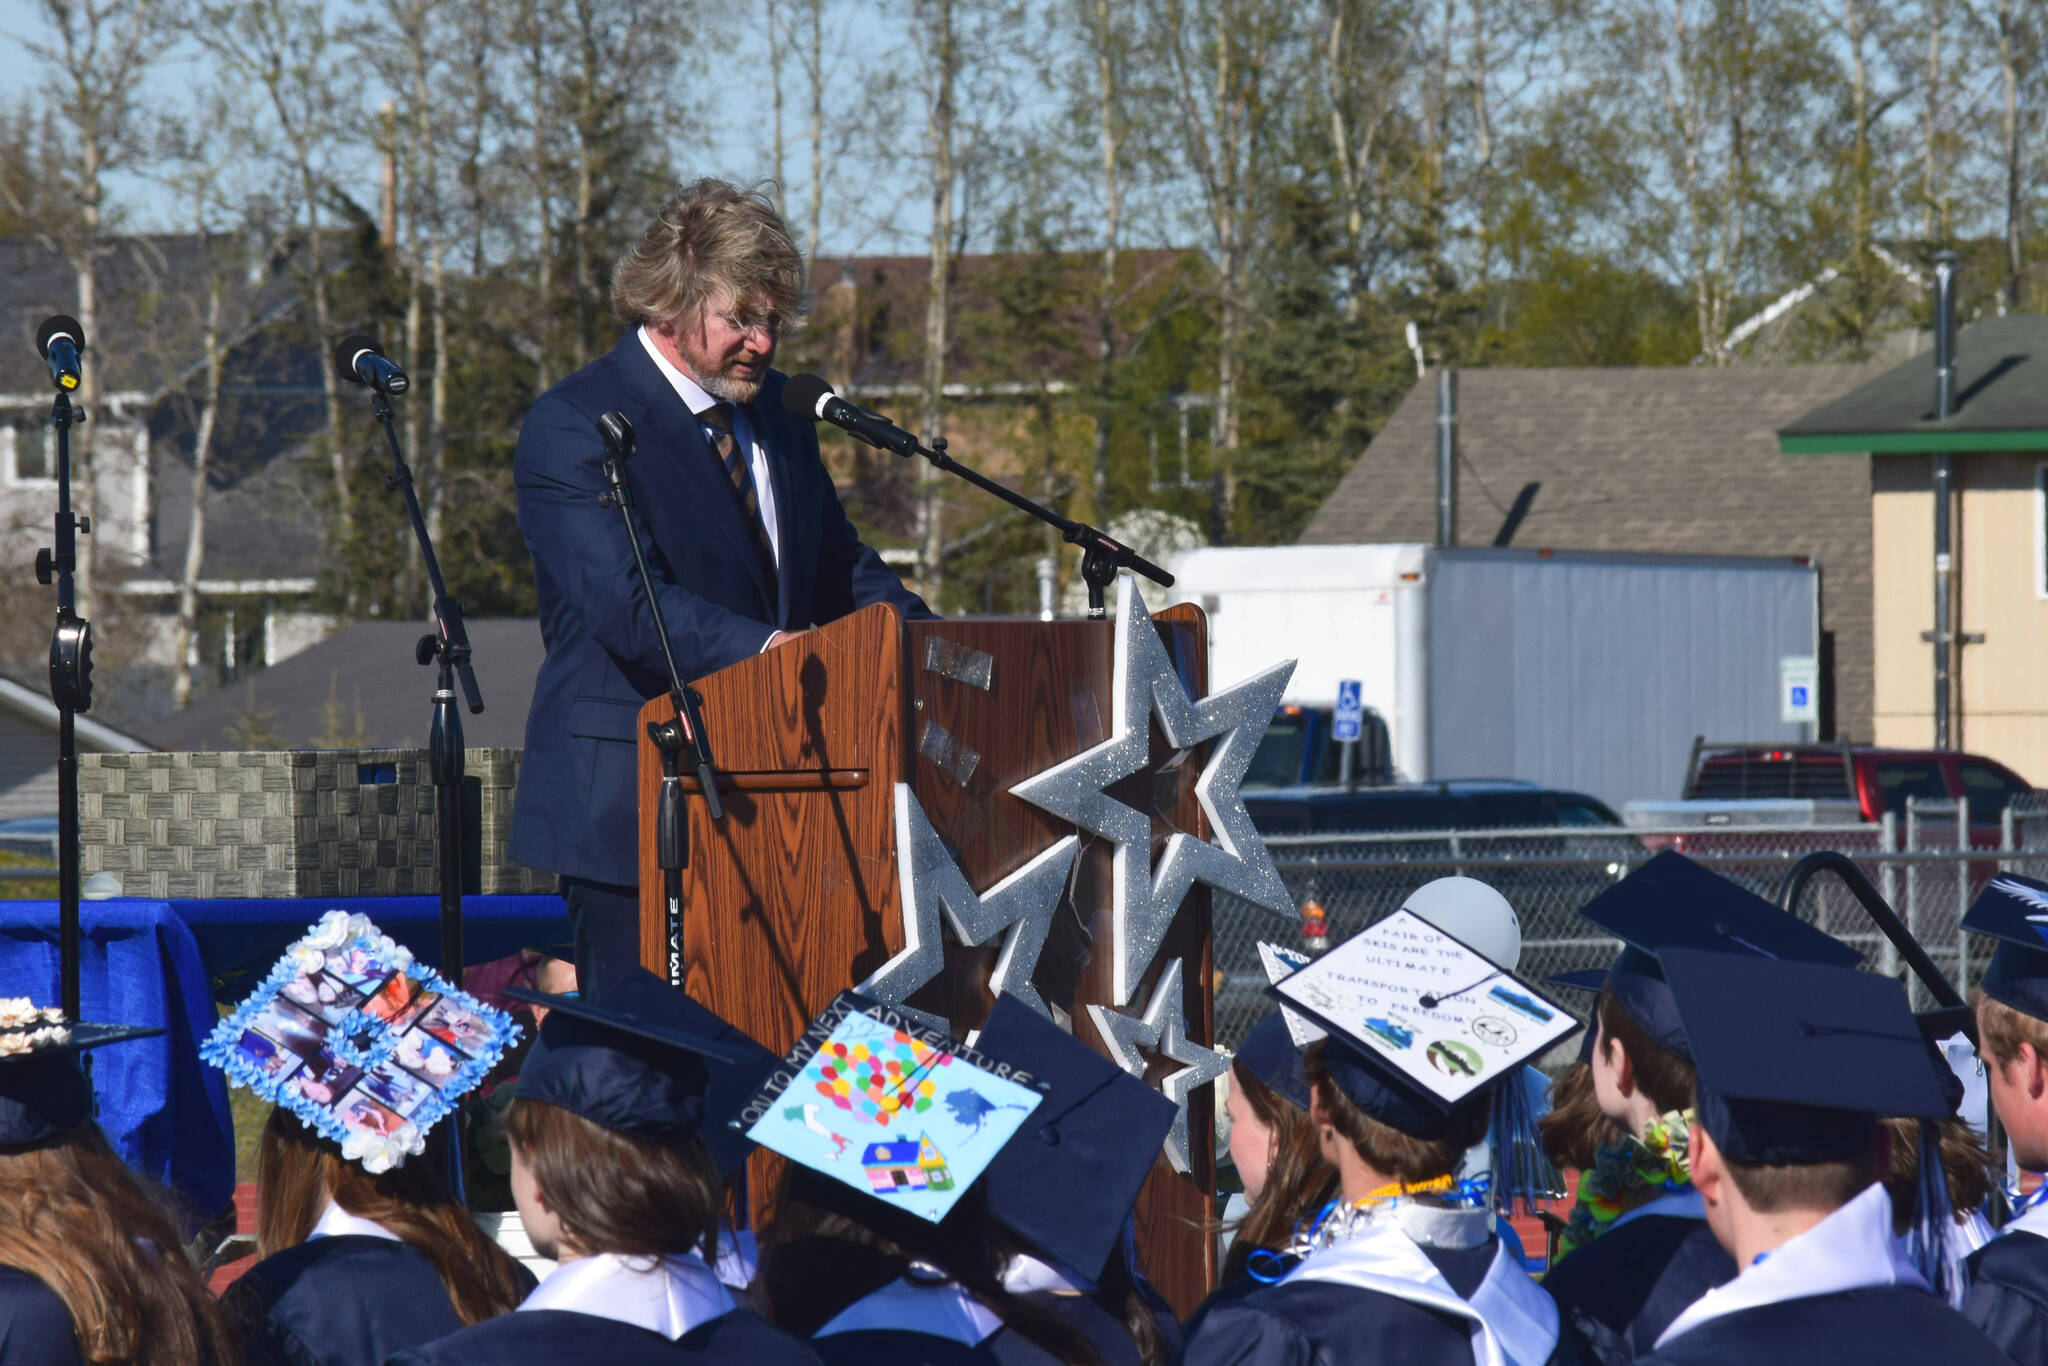 Ashlyn O’Hara / Peninsula Clarion
Soldotna High School Principal Sargeant Truesdell speaks during the school’s commencement ceremony on May 18, 2022, in Soldotna.